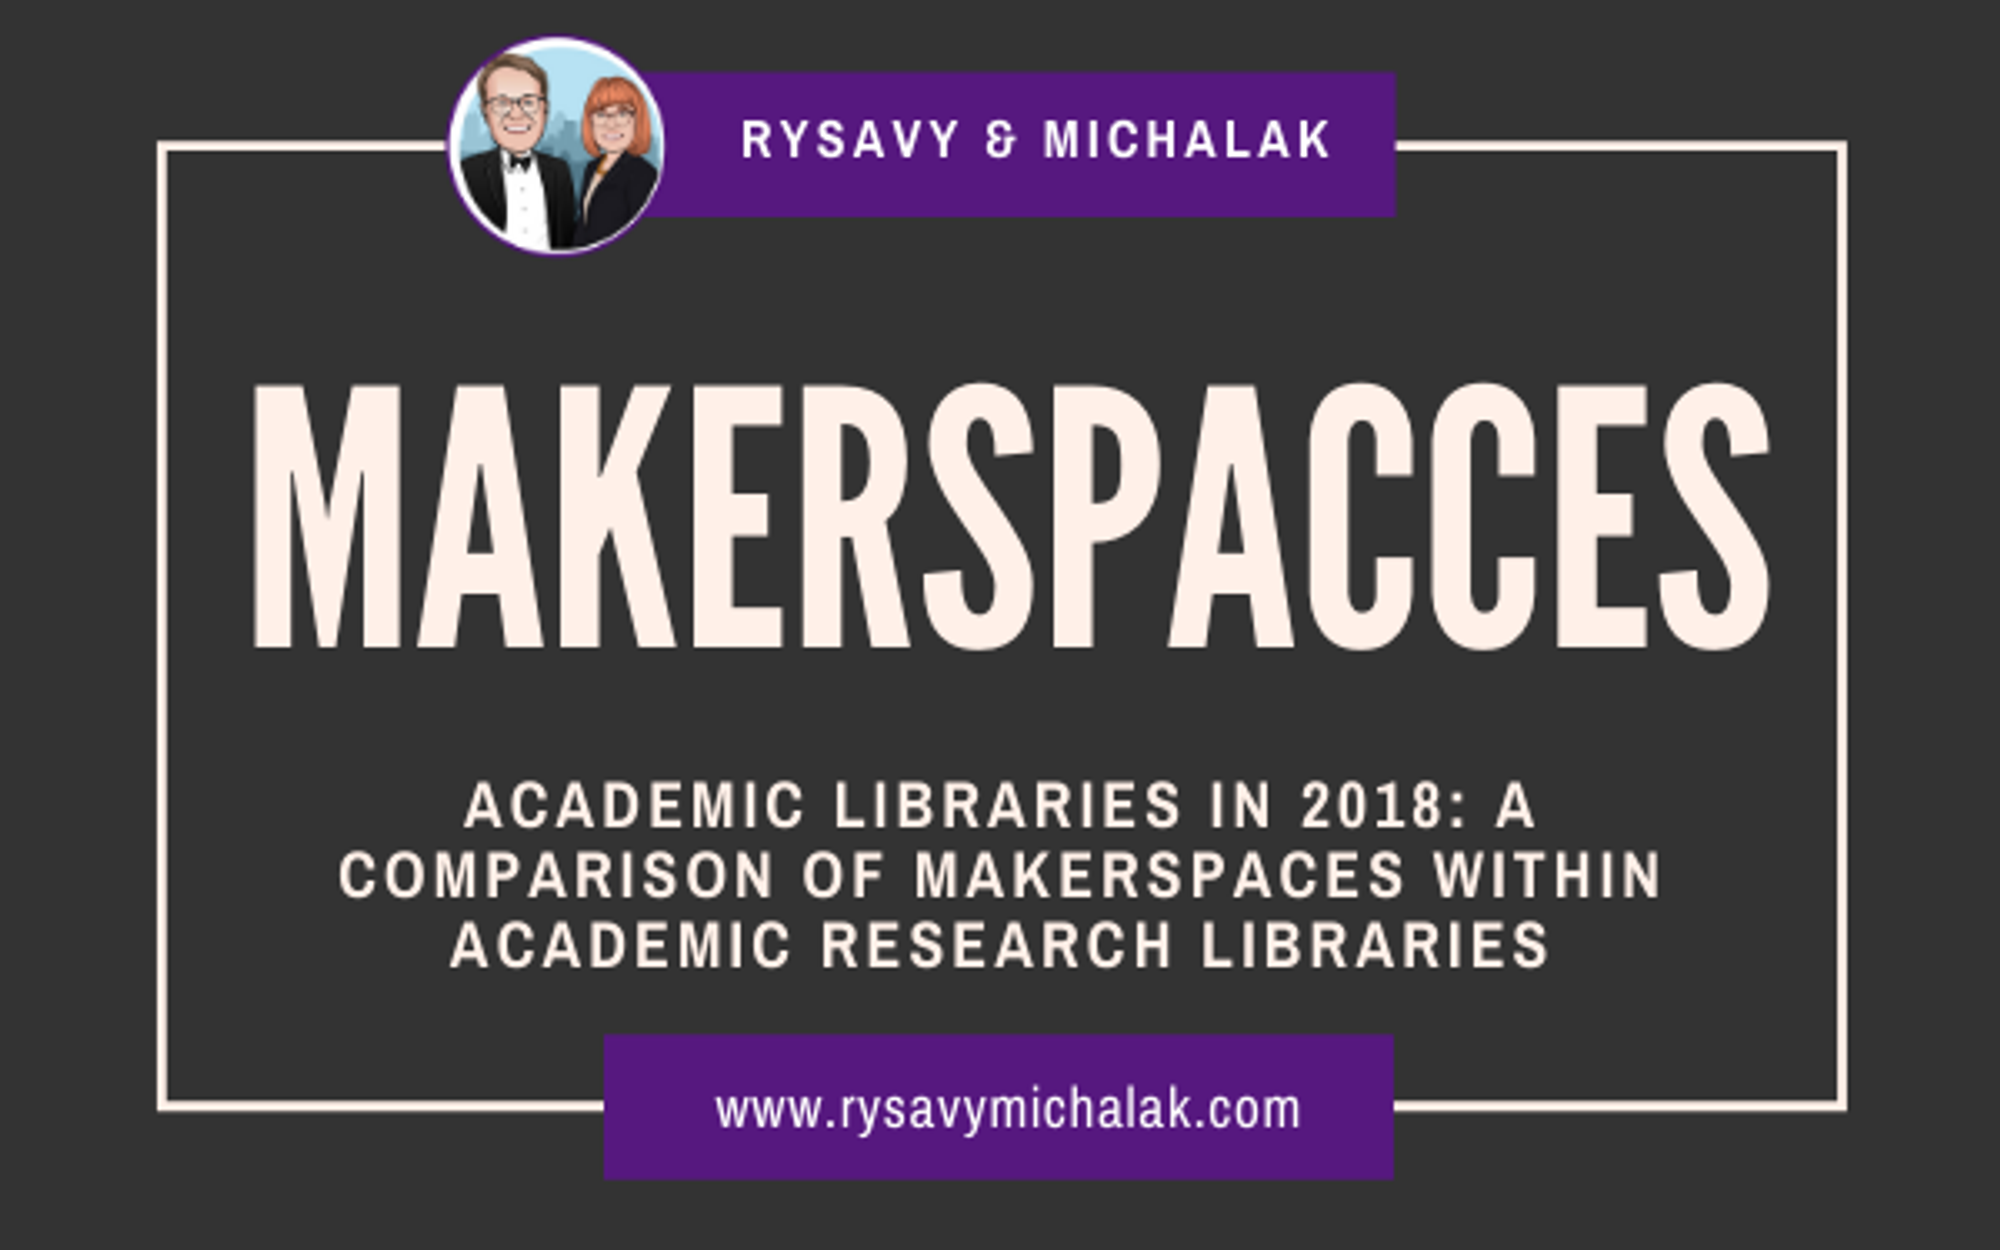 Academic Libraries in 2018: A Comparison of Makerspaces within Academic Research Libraries